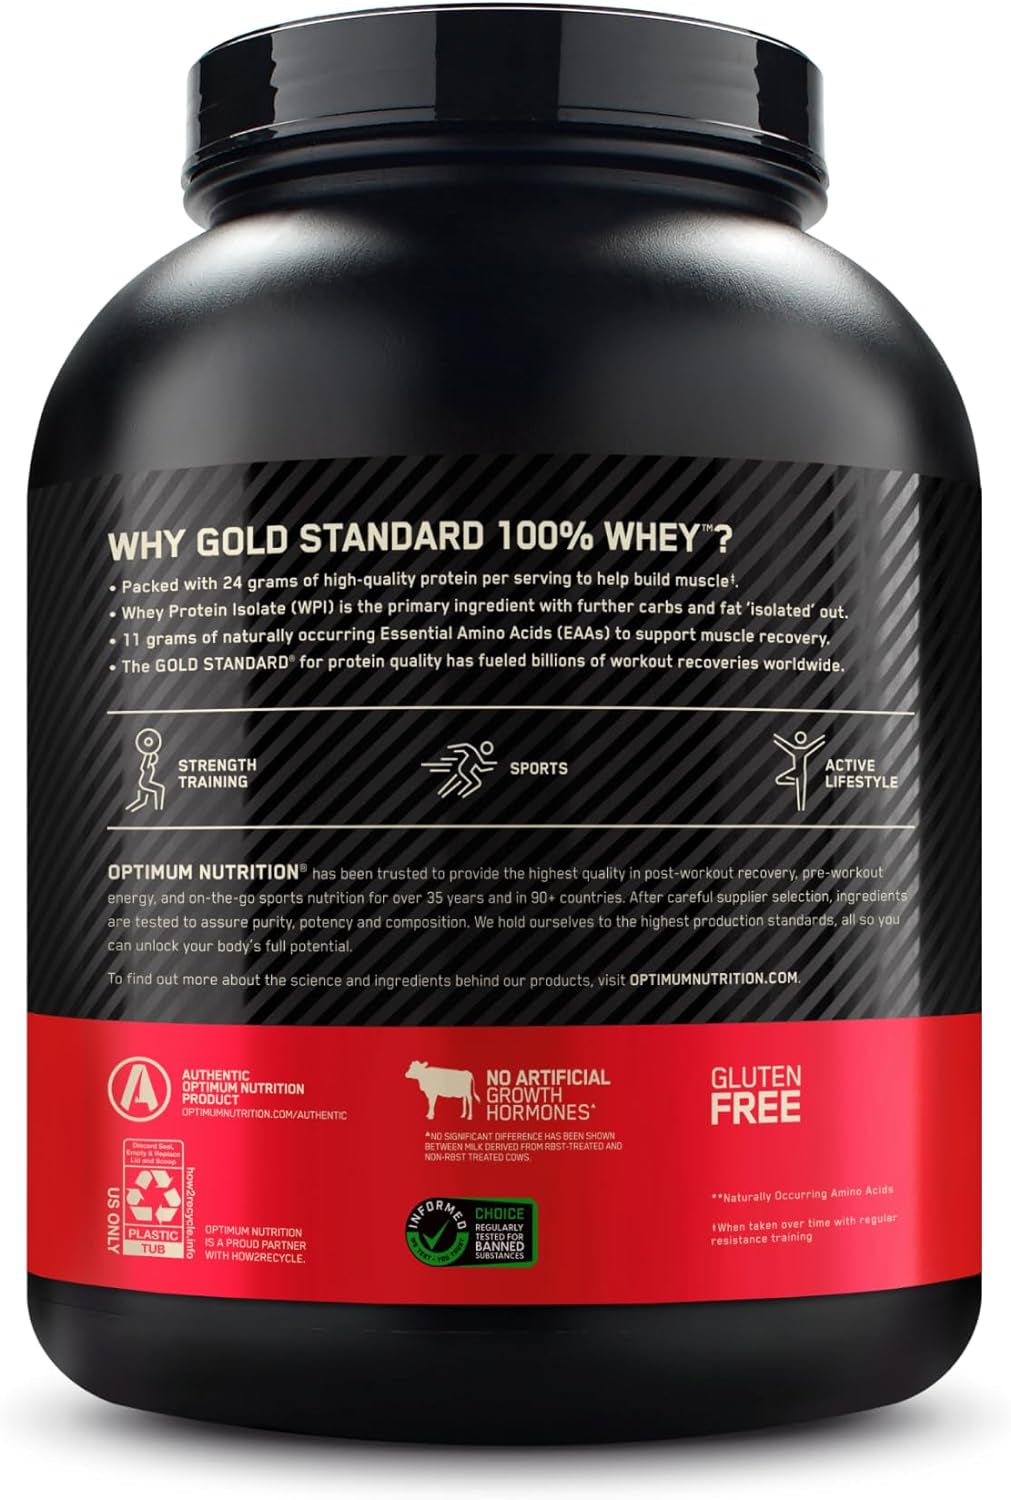 ON Gold Standard 100% Whey Muscle Building and Recovery Protein Powder with Naturally Occurring Glutamine and BCAA Amino Acids, Double Rich Chocolate Flavour, 73 Servings, 2.26 Kg, Packaging May Vary